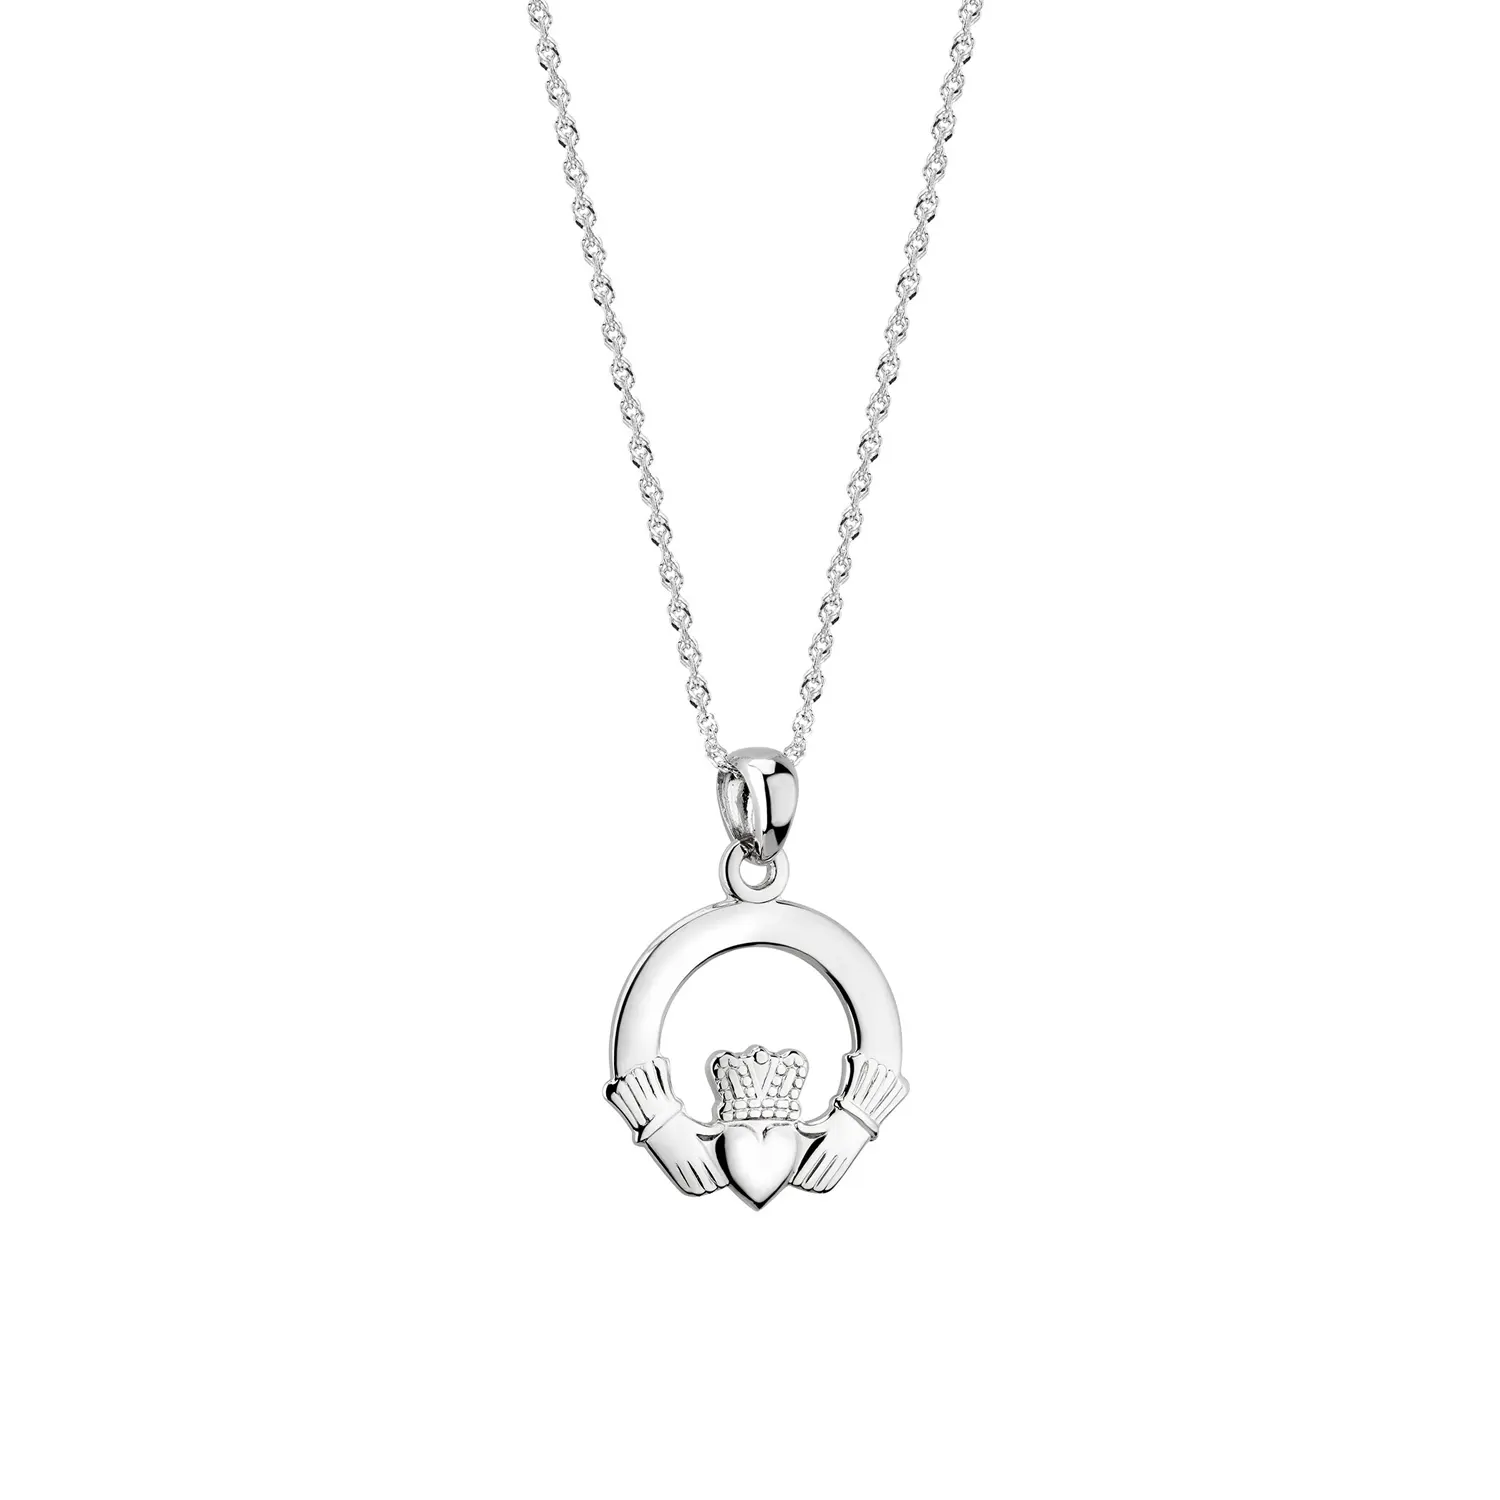 14ct. White Gold Claddagh Necklace